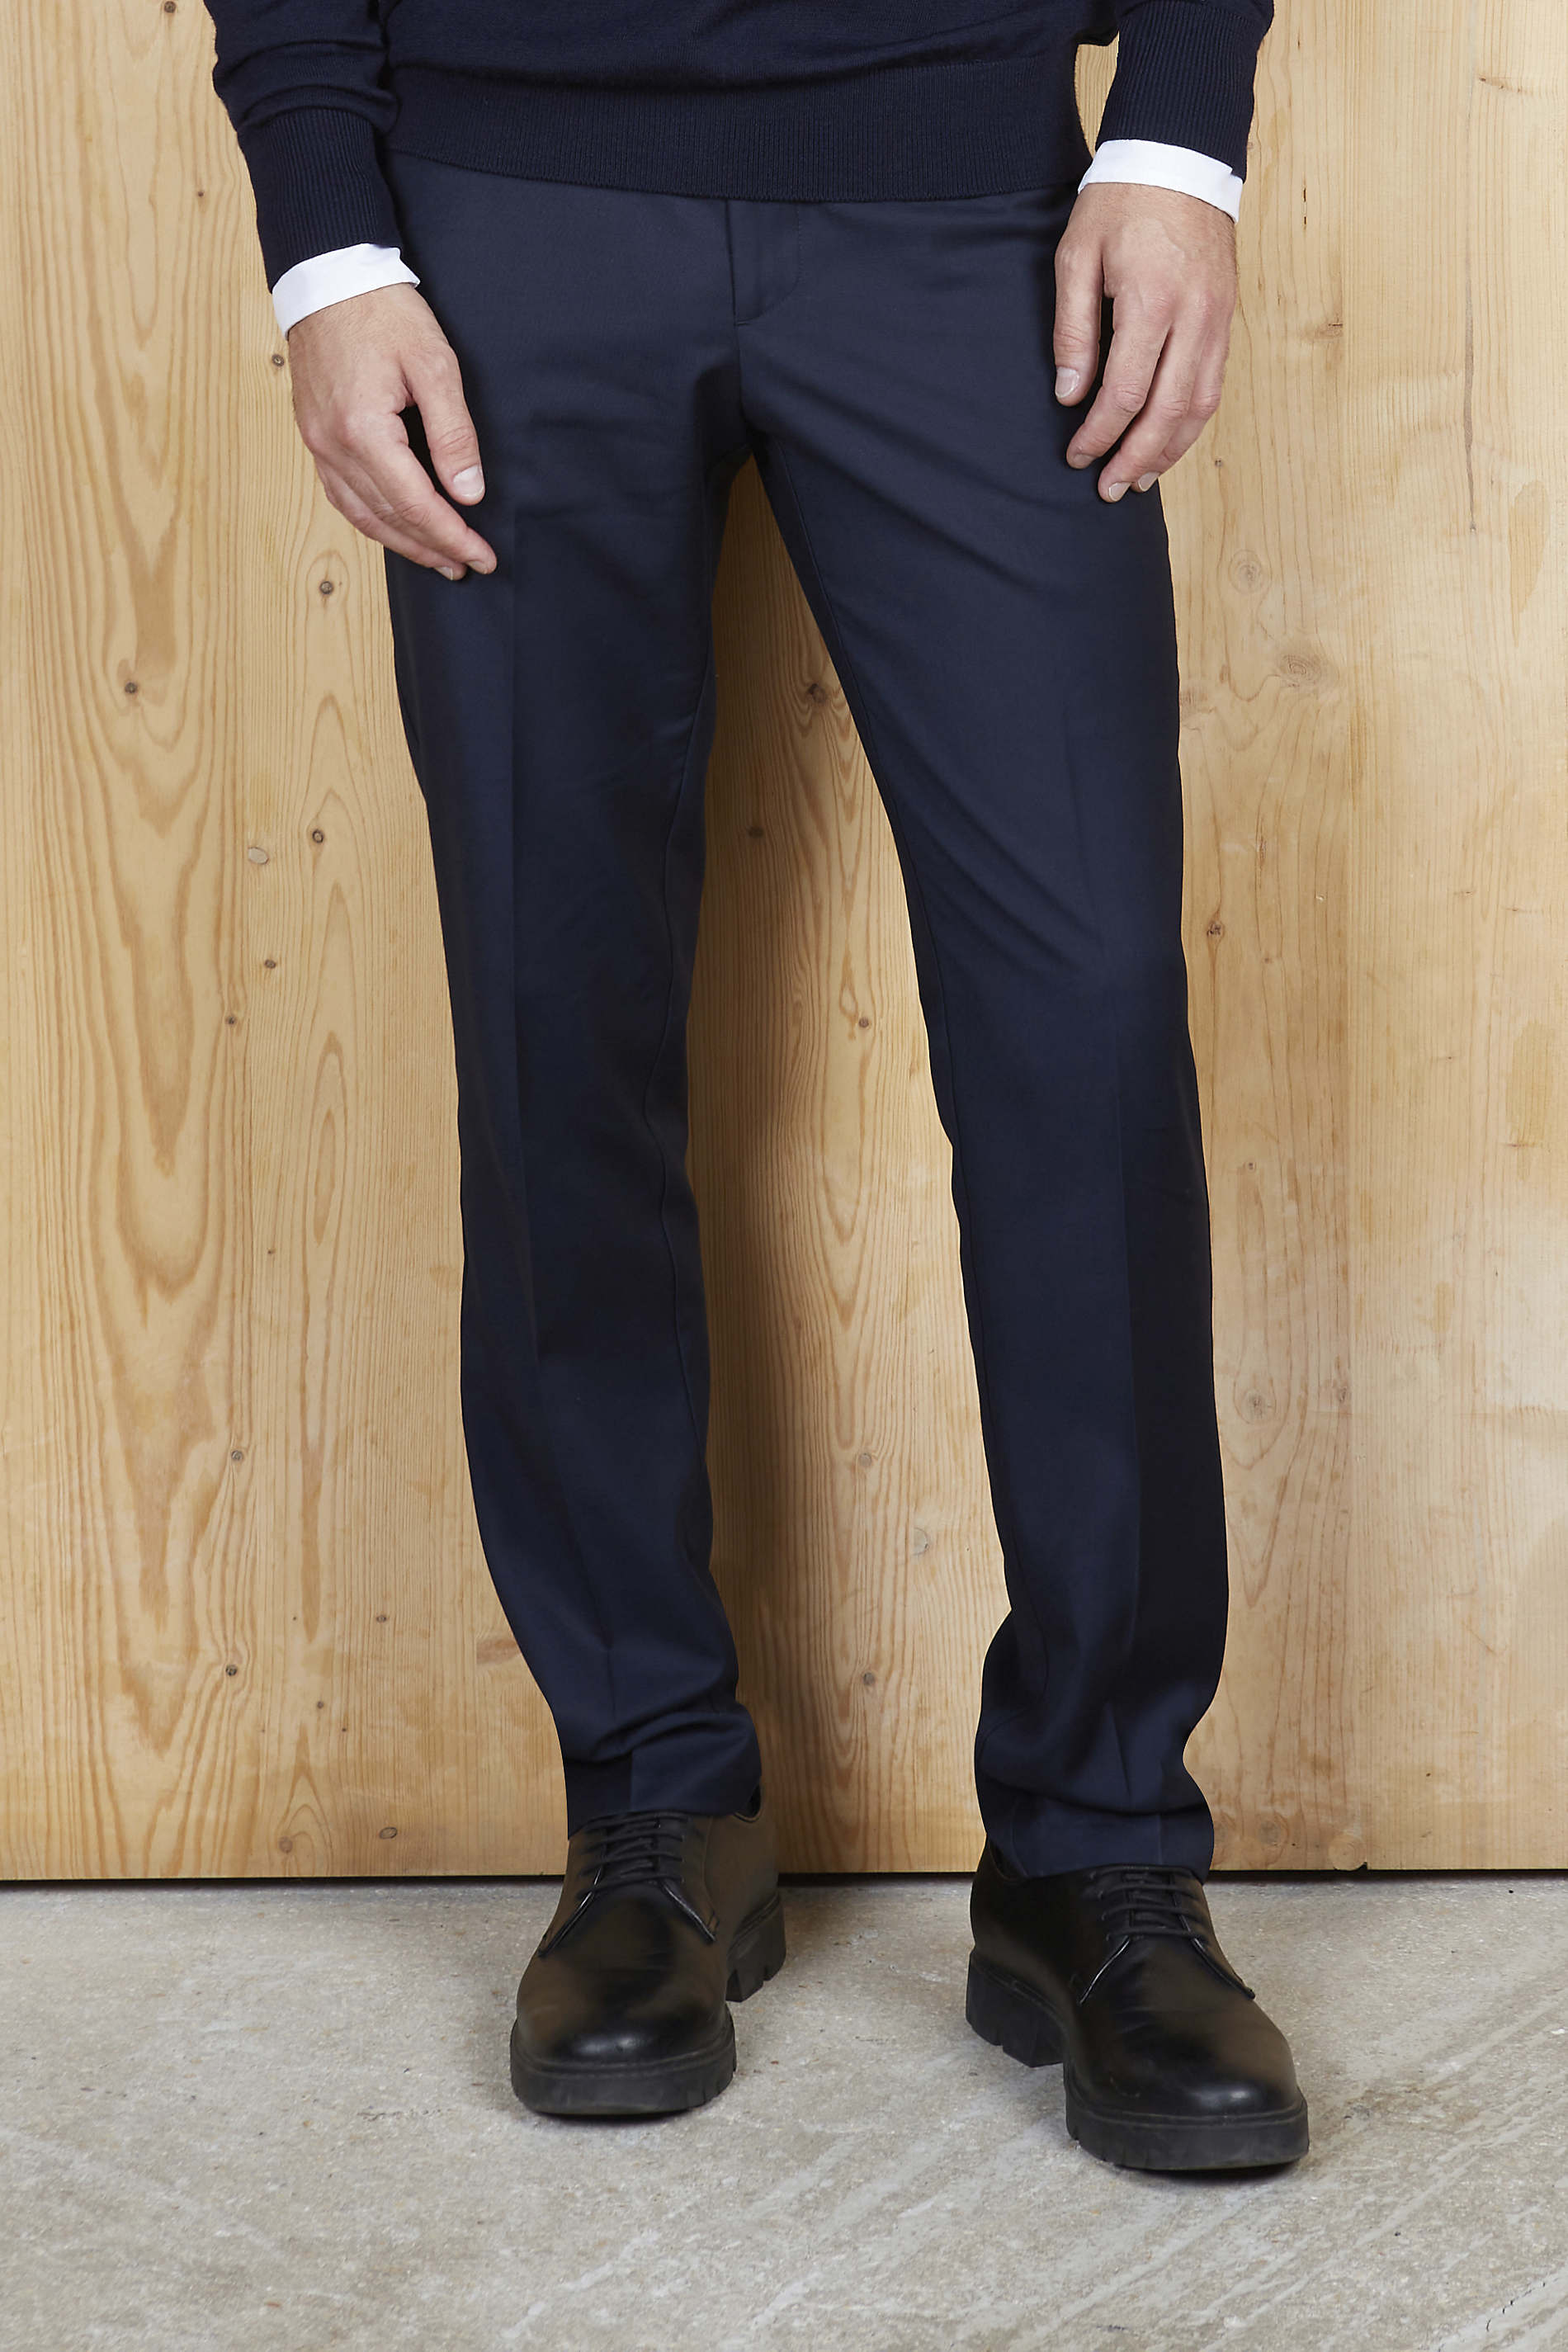 MEN'S ELASTICATED WAIST SUIT TROUSERS<p>These smart and timeless trousers are an iconic piece of men’s wardrobe. With their mid-season soft fabric and elasticated waistband, they fit all body shapes. They can be worn as a part of a three-piece suit for formal events or with a T-shirt for a casual style.</p> NEOBLU GABIN MEN